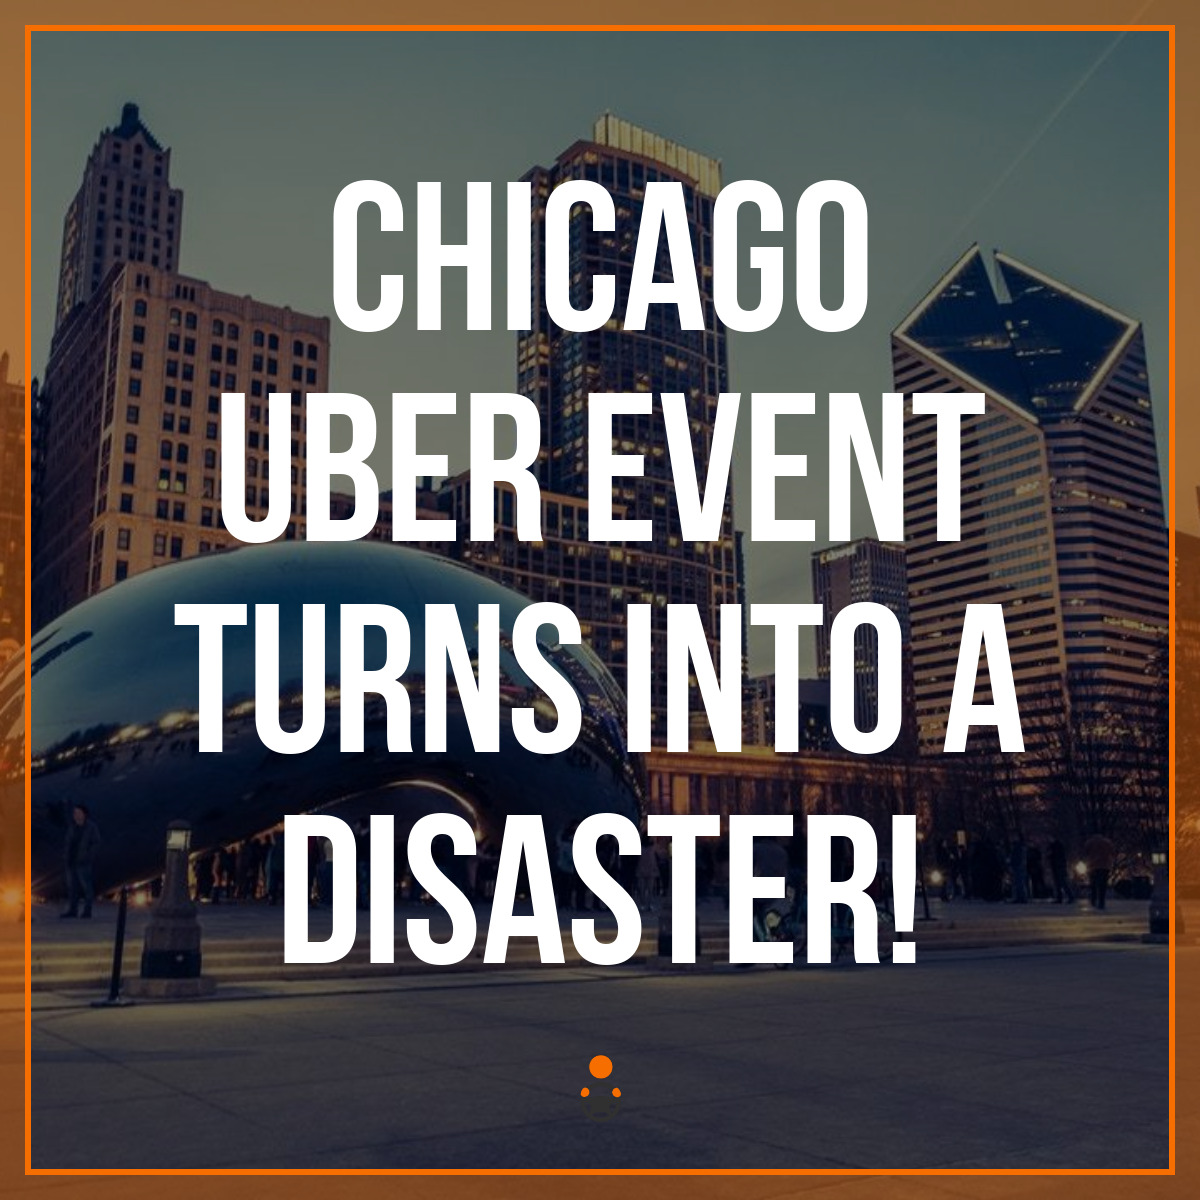 Chicago Uber Event Turns Into a Disaster!